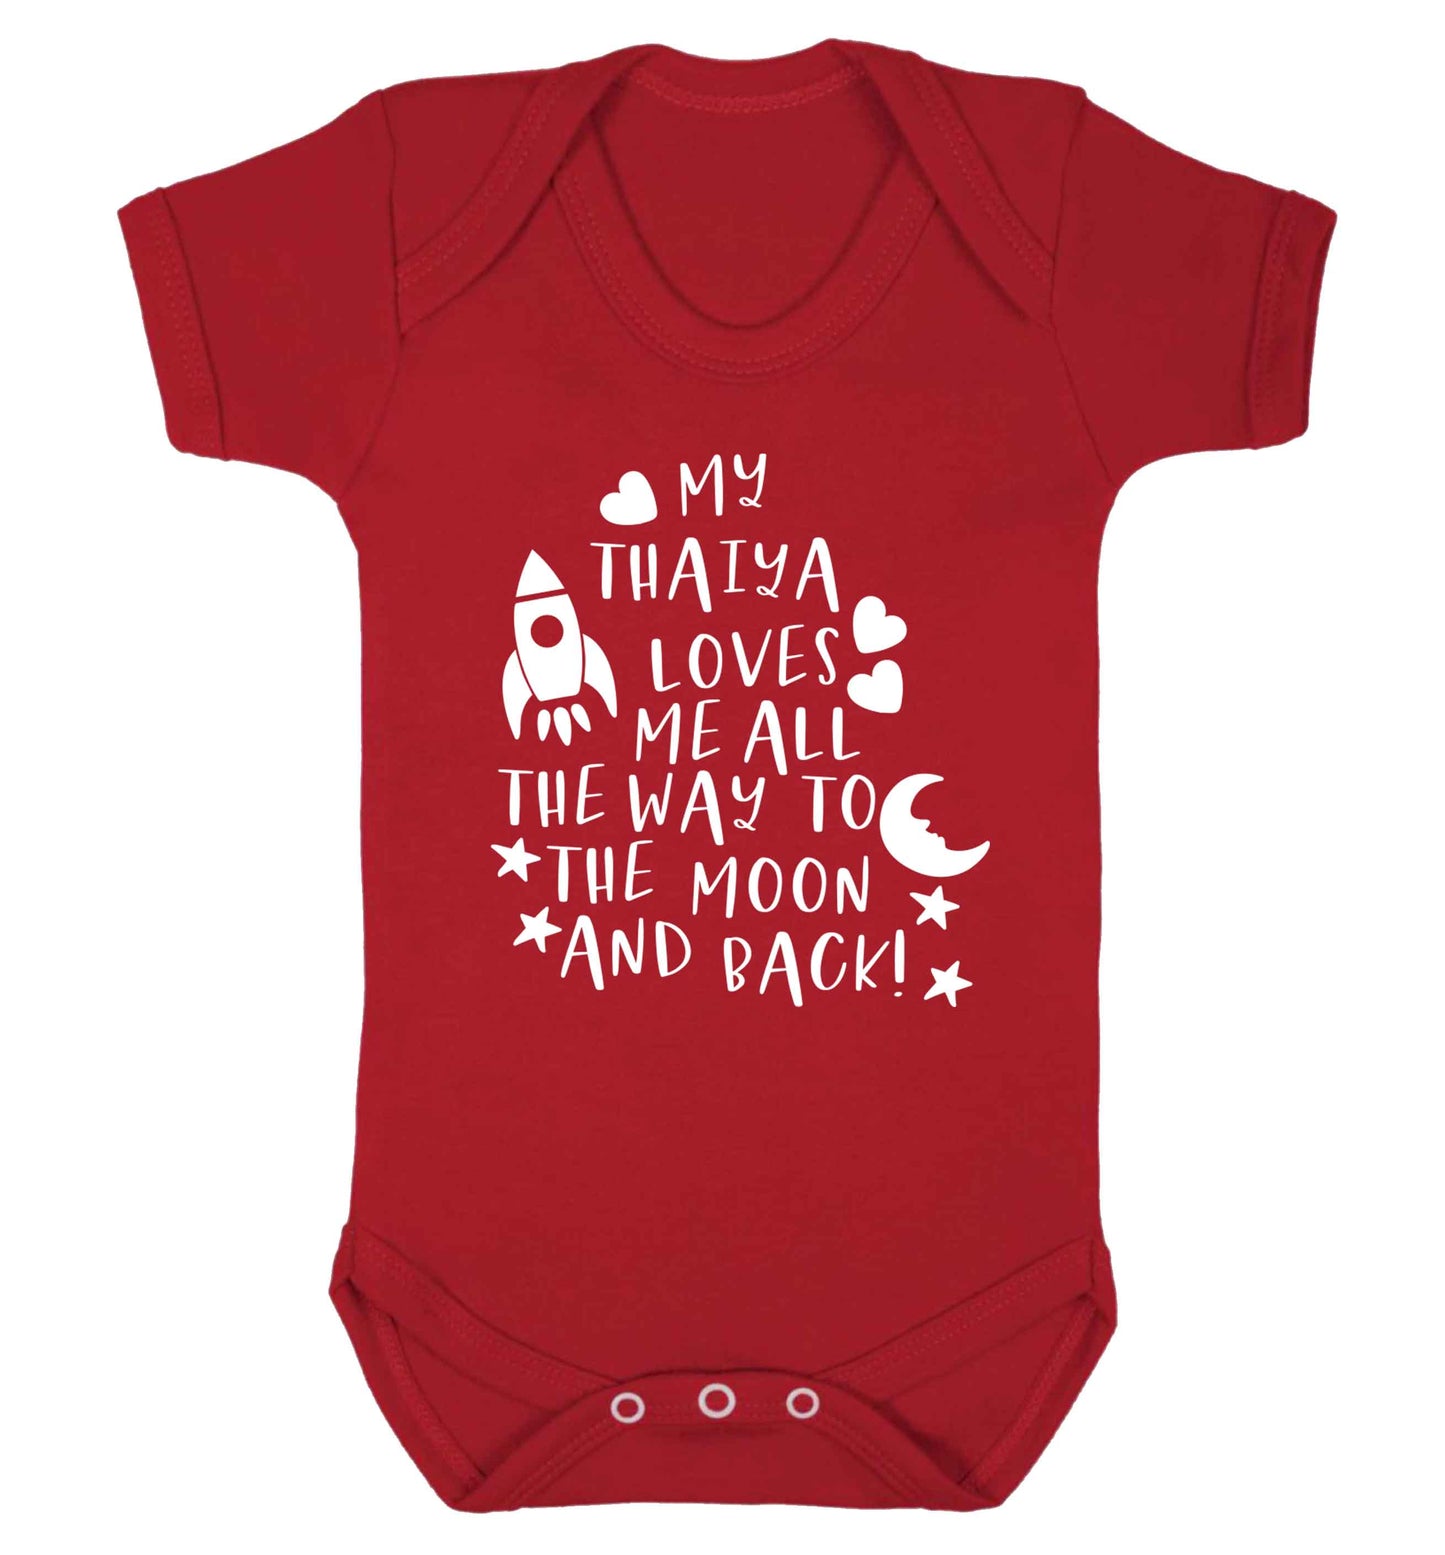 My thaiya loves me all the way to the moon and back Baby Vest red 18-24 months